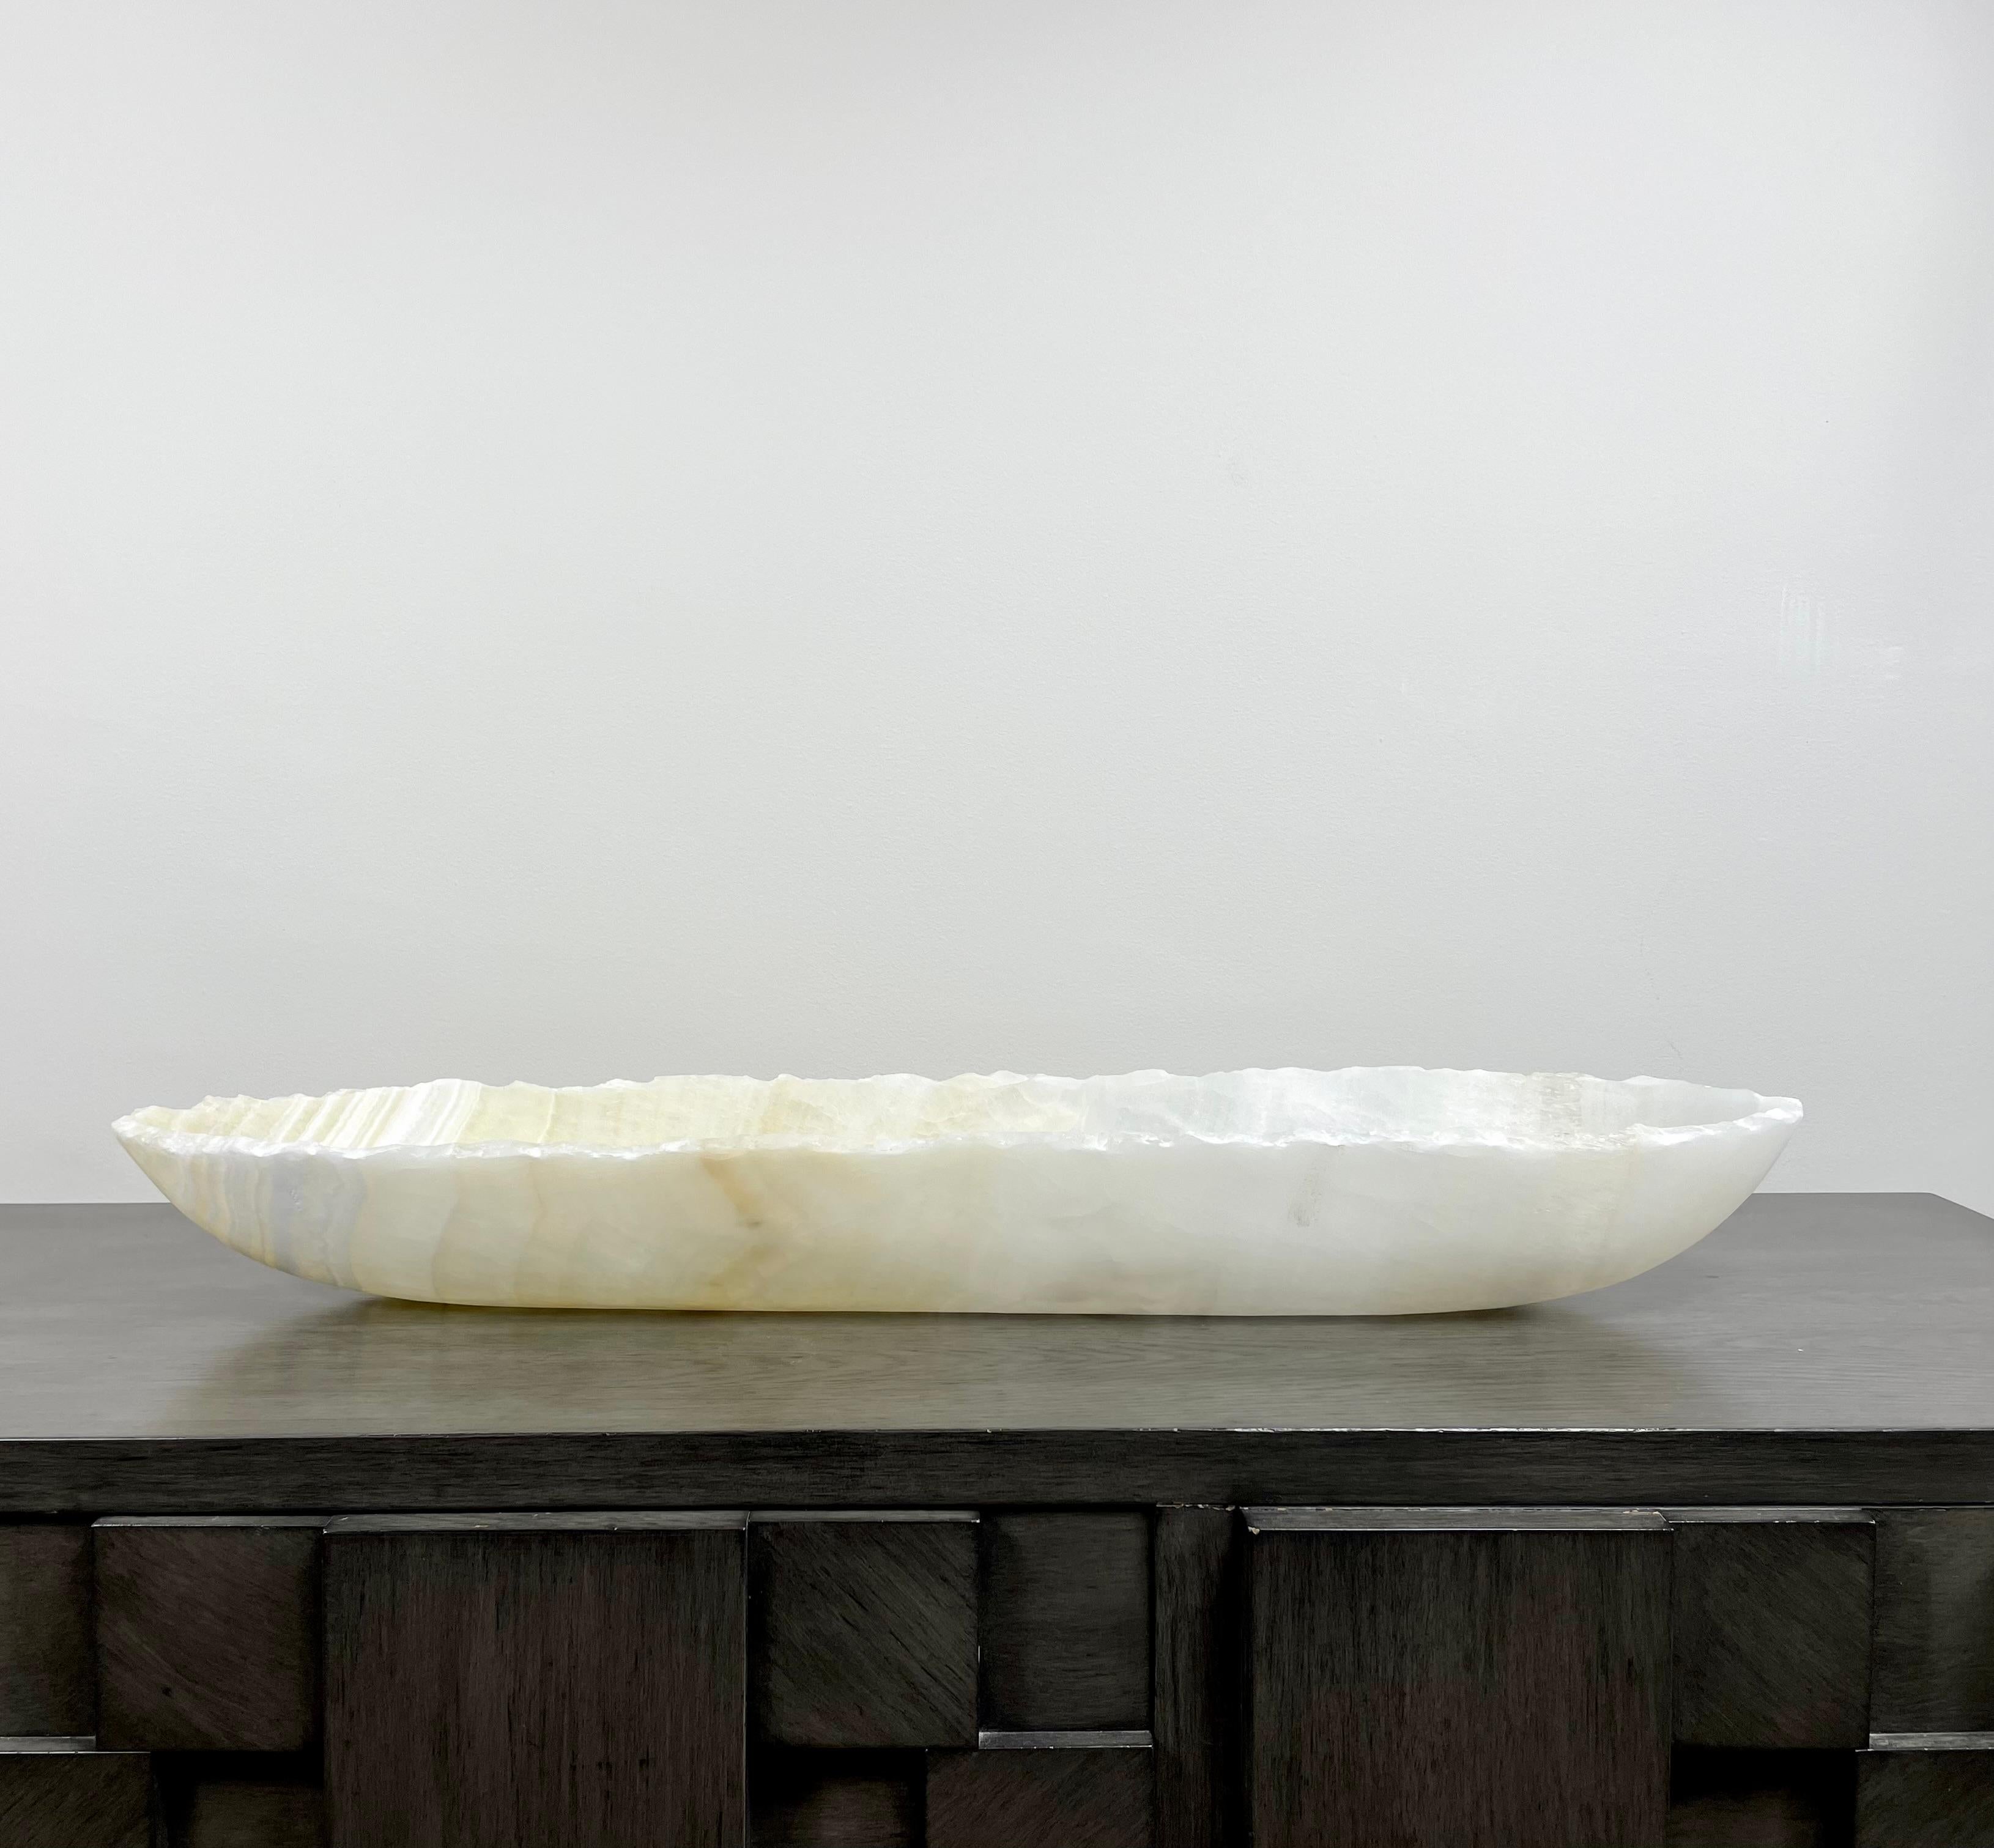 An elegant oblong large onyx bowl with stunning striations. It has serene tones of cream, pale yellow and white. This one of a kind decorative vessel is meticulously hand-carved from a single piece of onyx by skilled artists to reveal its' inherent